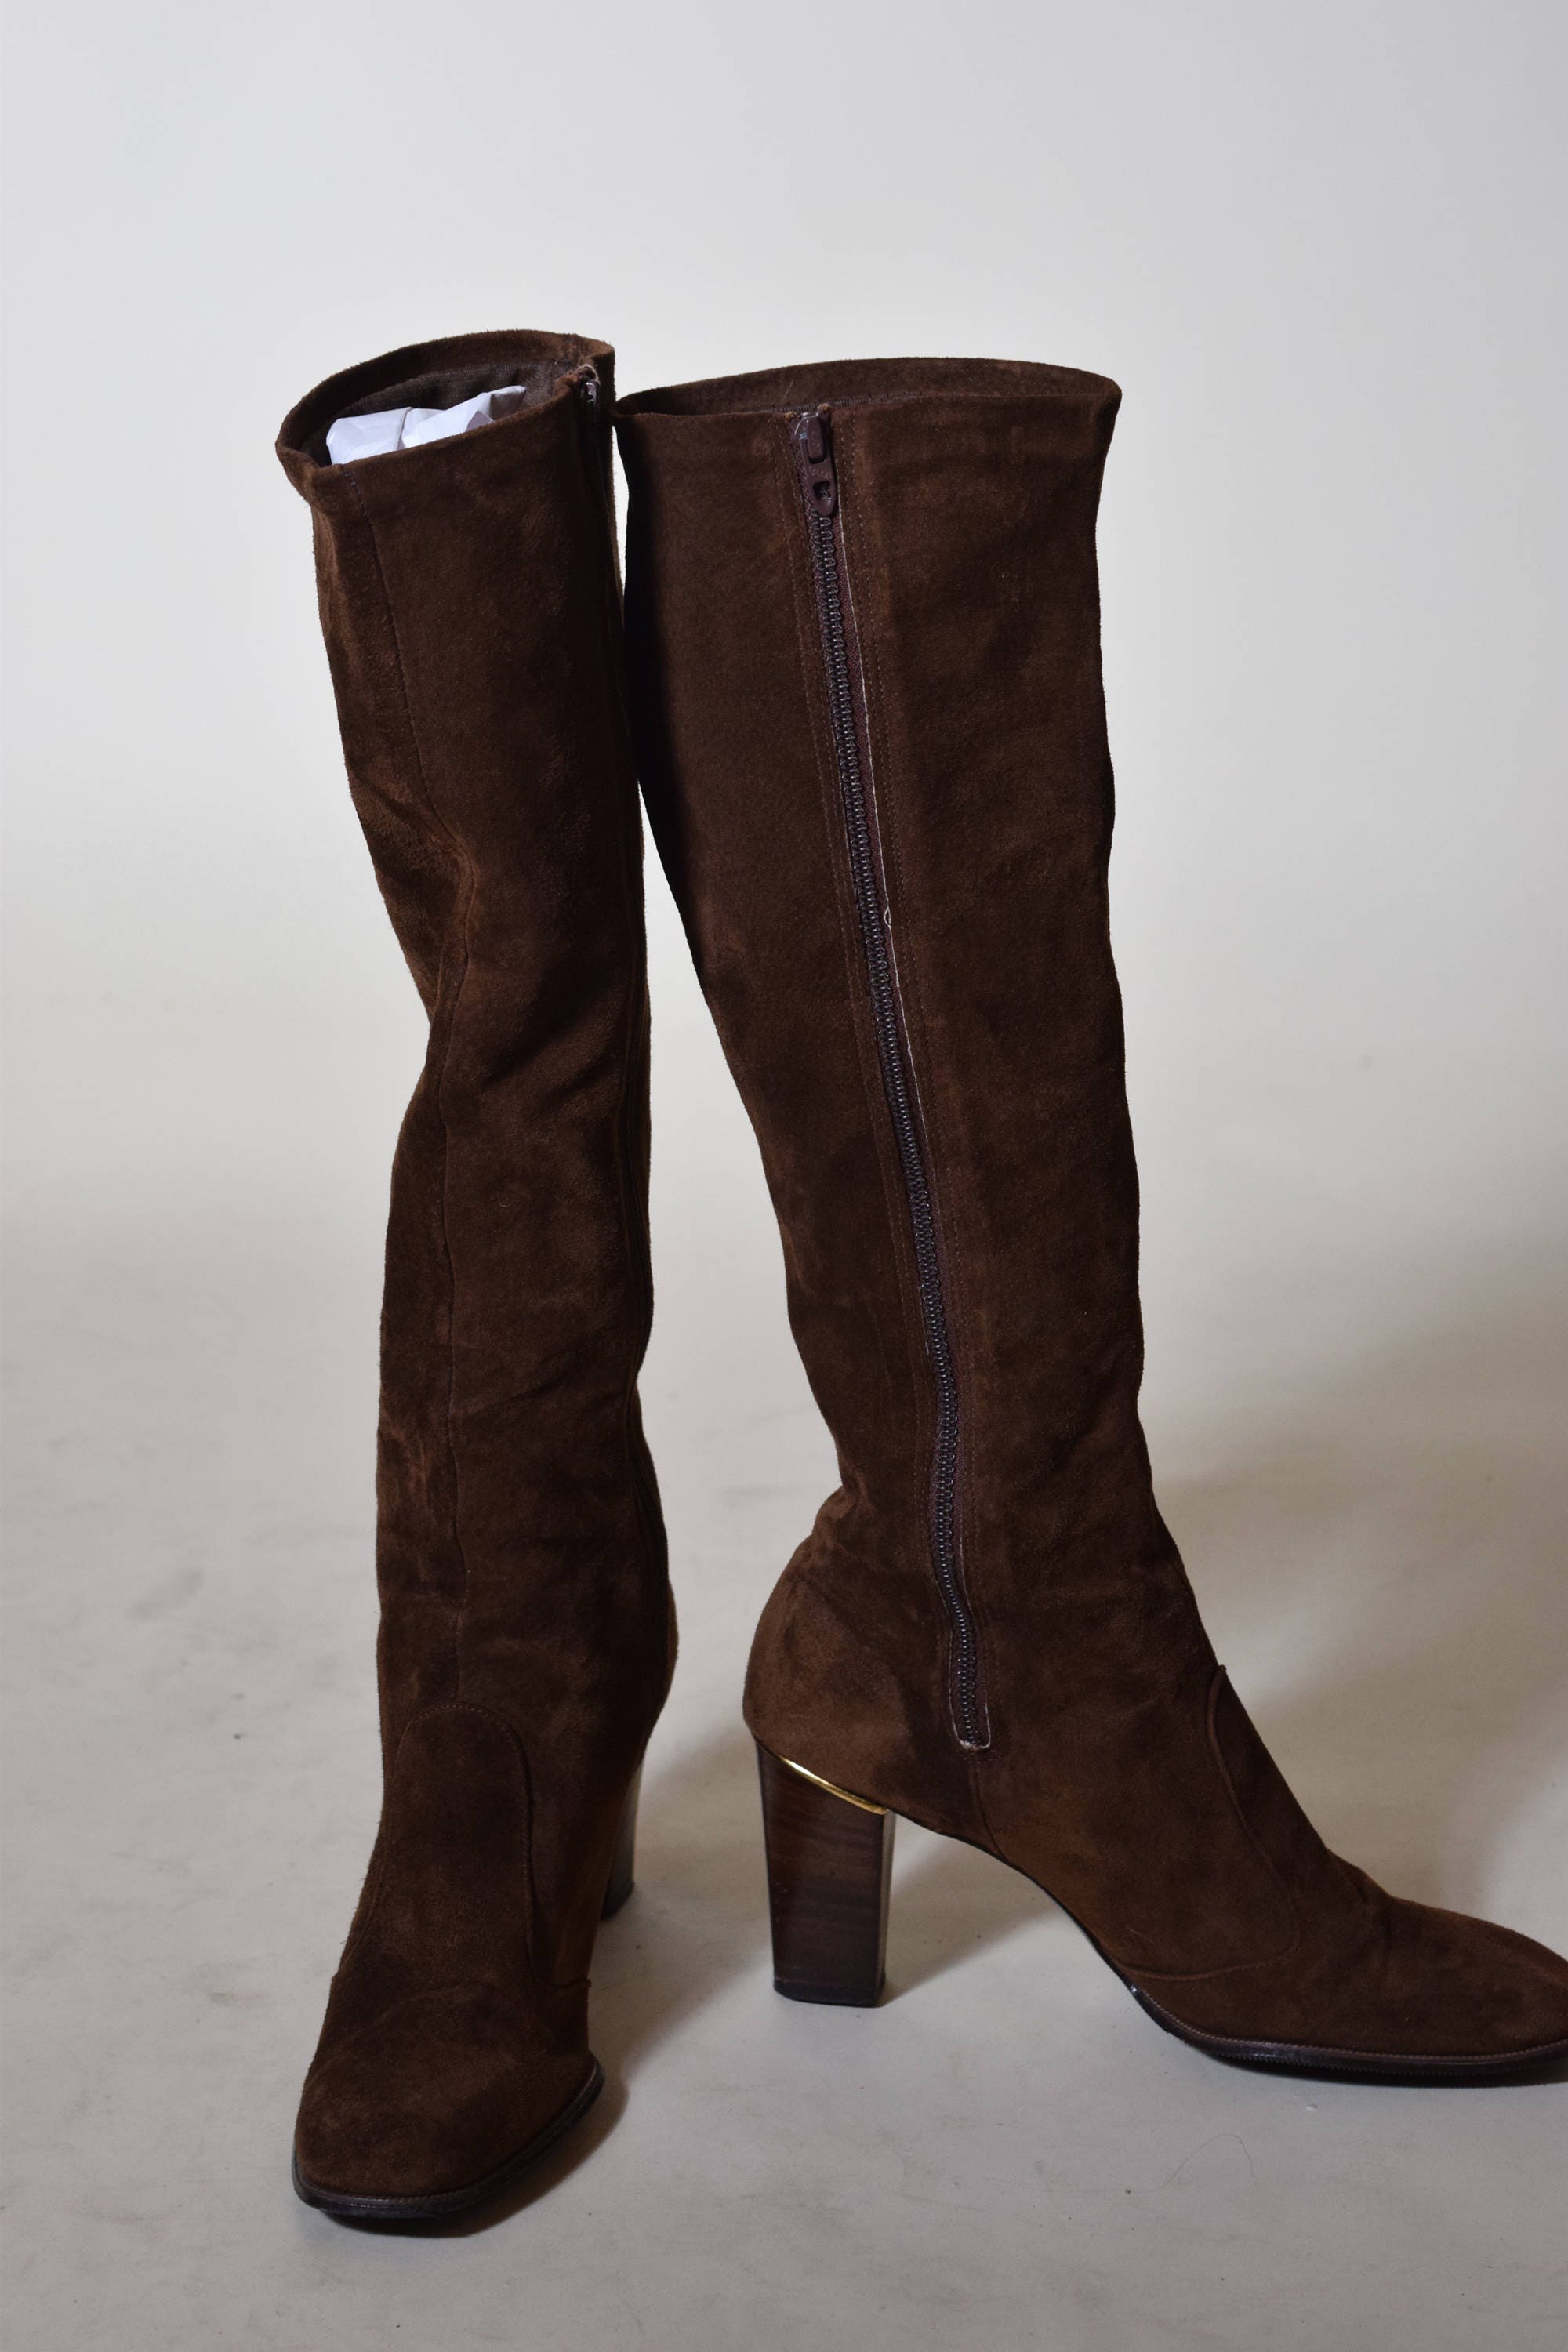 Authentic vintage 1960's brown Suede GoGo boots Joyce of California ...